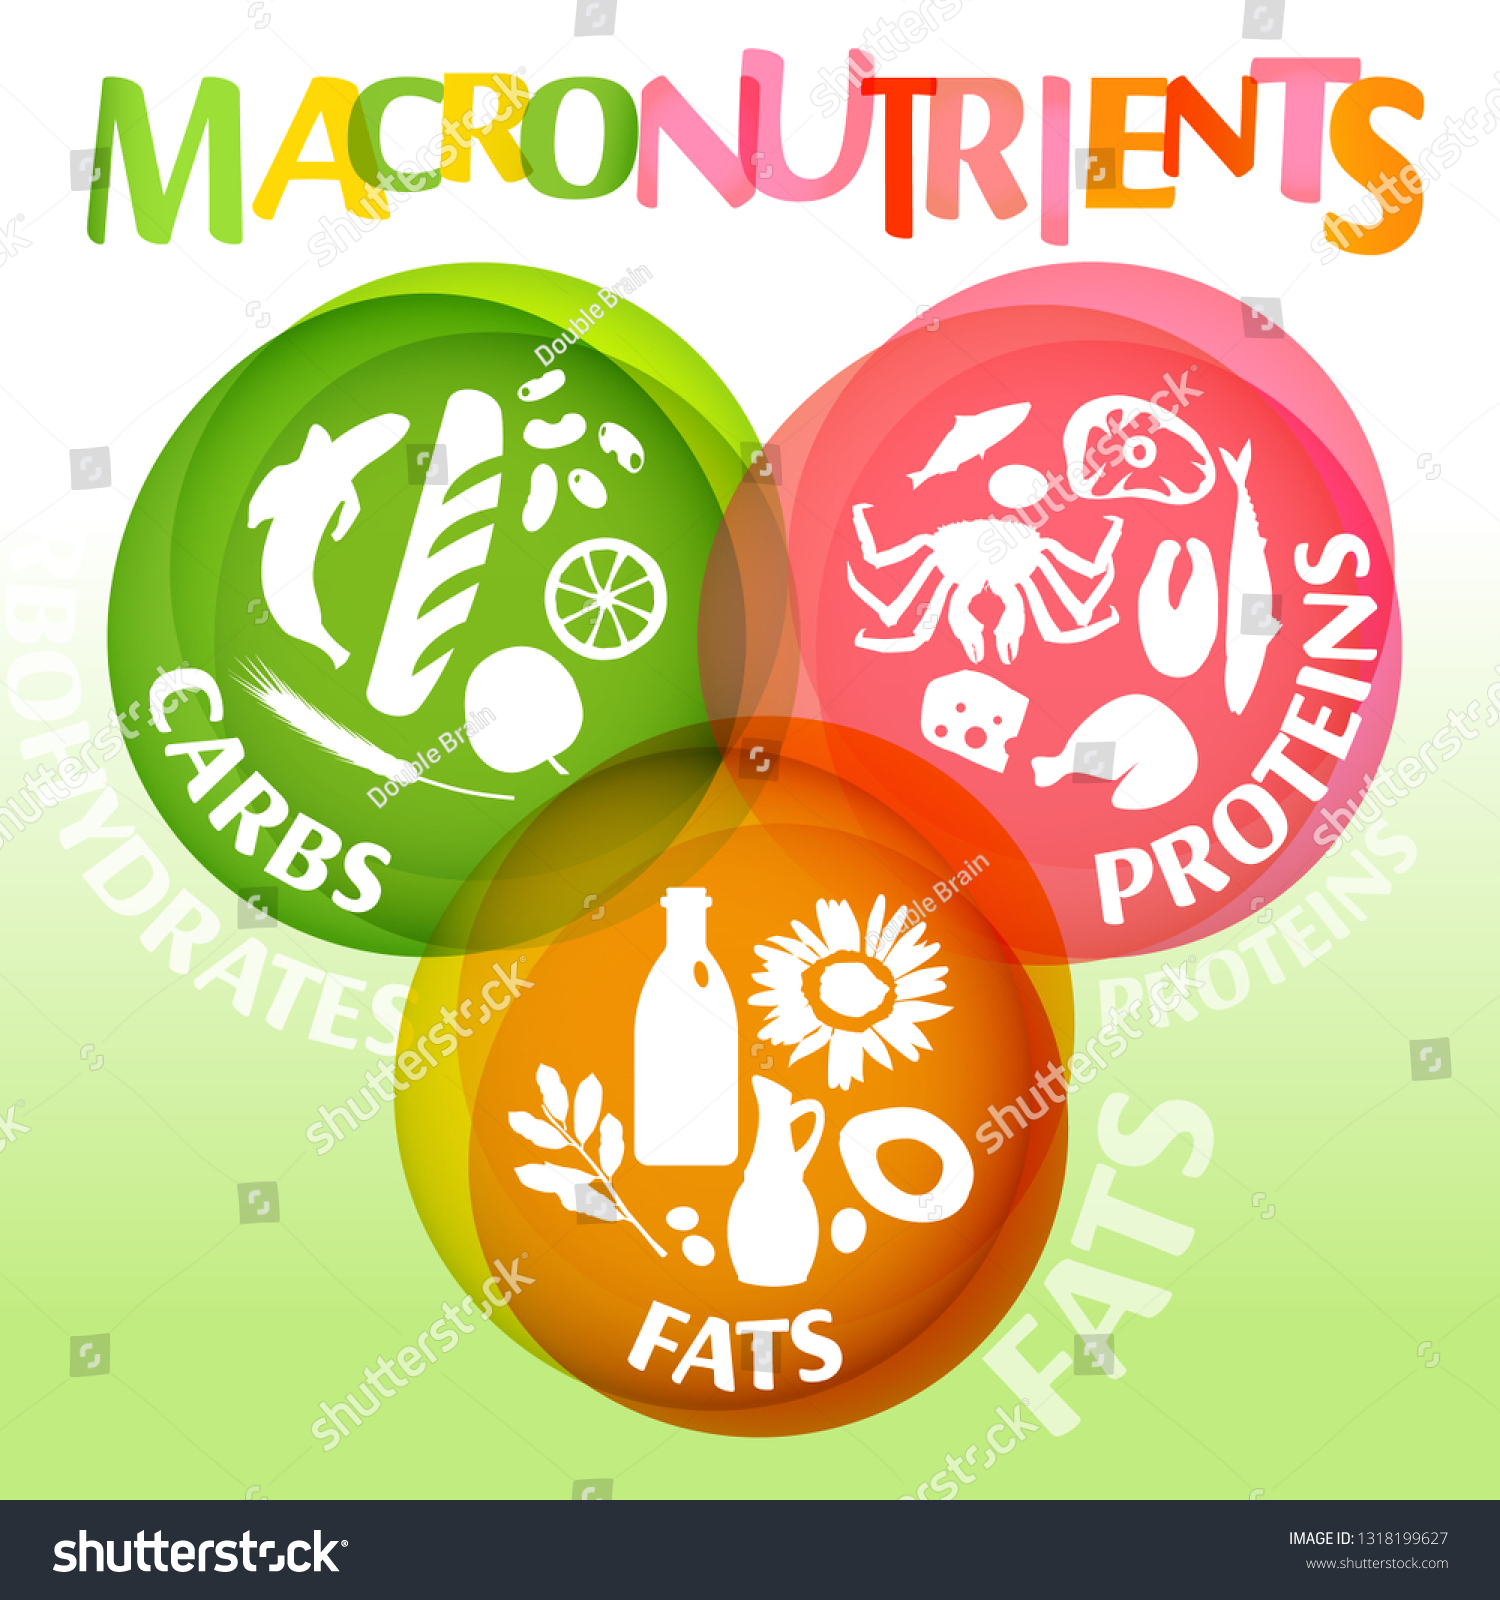 Main Food Groups Macronutrients Carbohydrates Fats Stock Vector Royalty Free 1318199627 1719